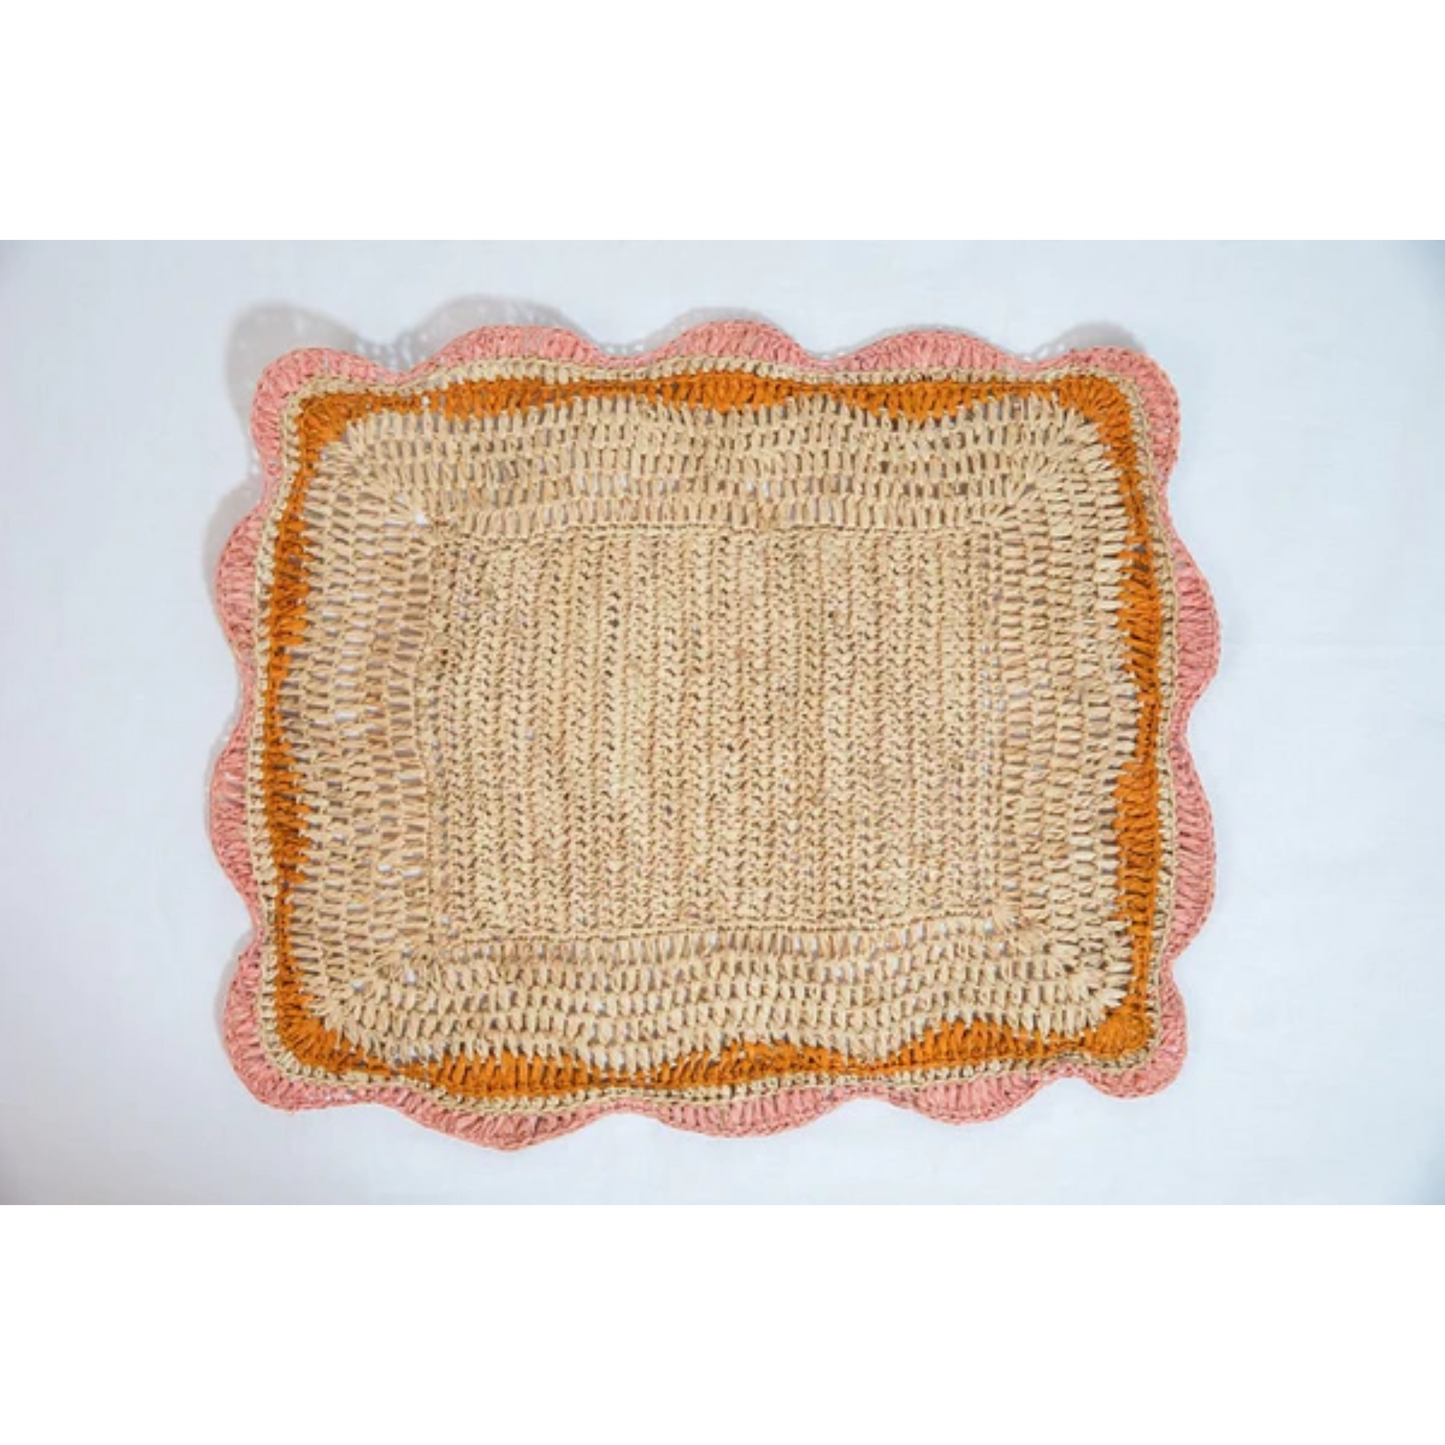 Garden Party placemats with Pink and Orange Edges, Hand Woven Rectangular Table Mat